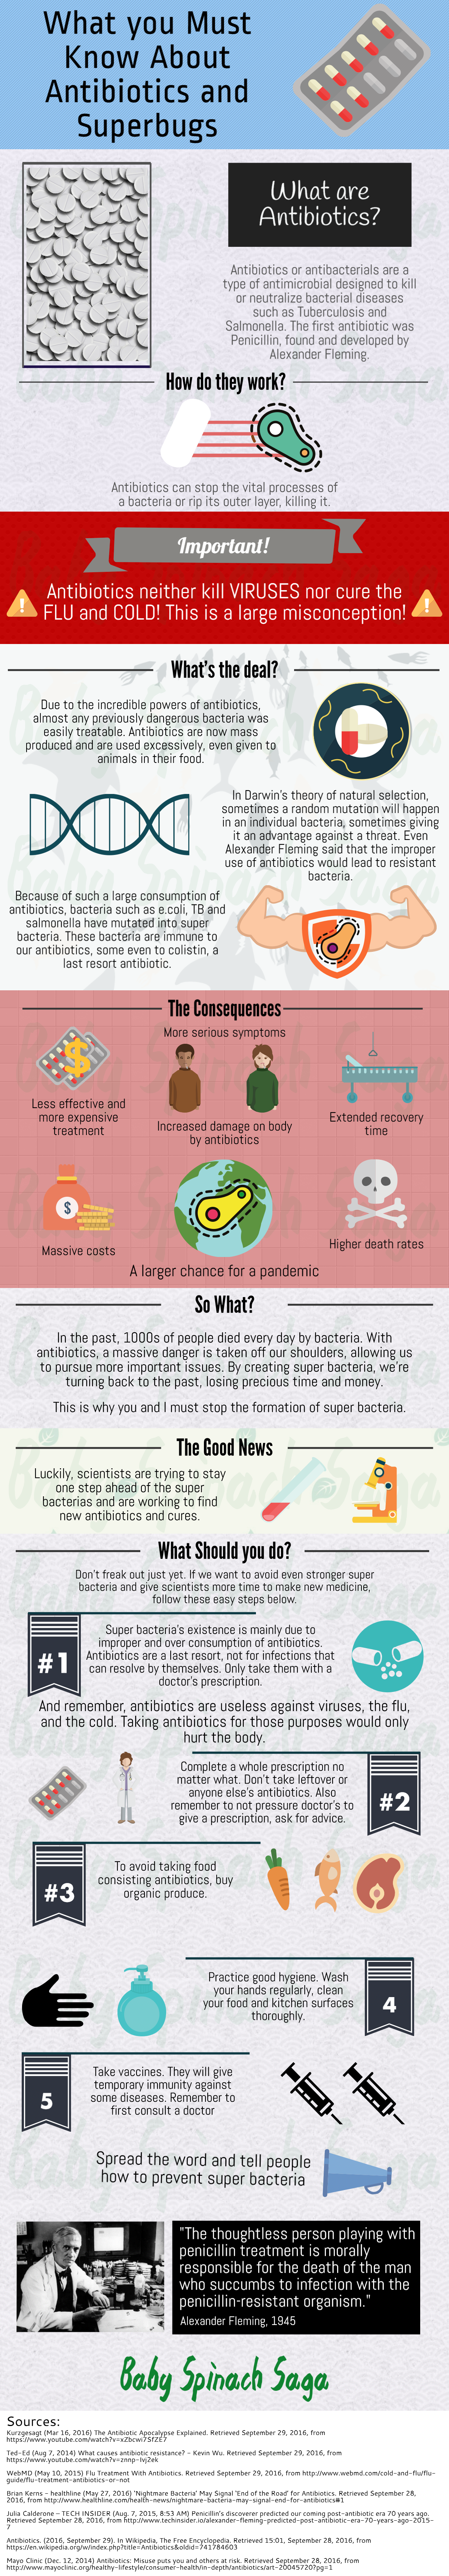 baby-spinach-saga-what-you-must-know-about-antibiotics-and-superbugs-infographic